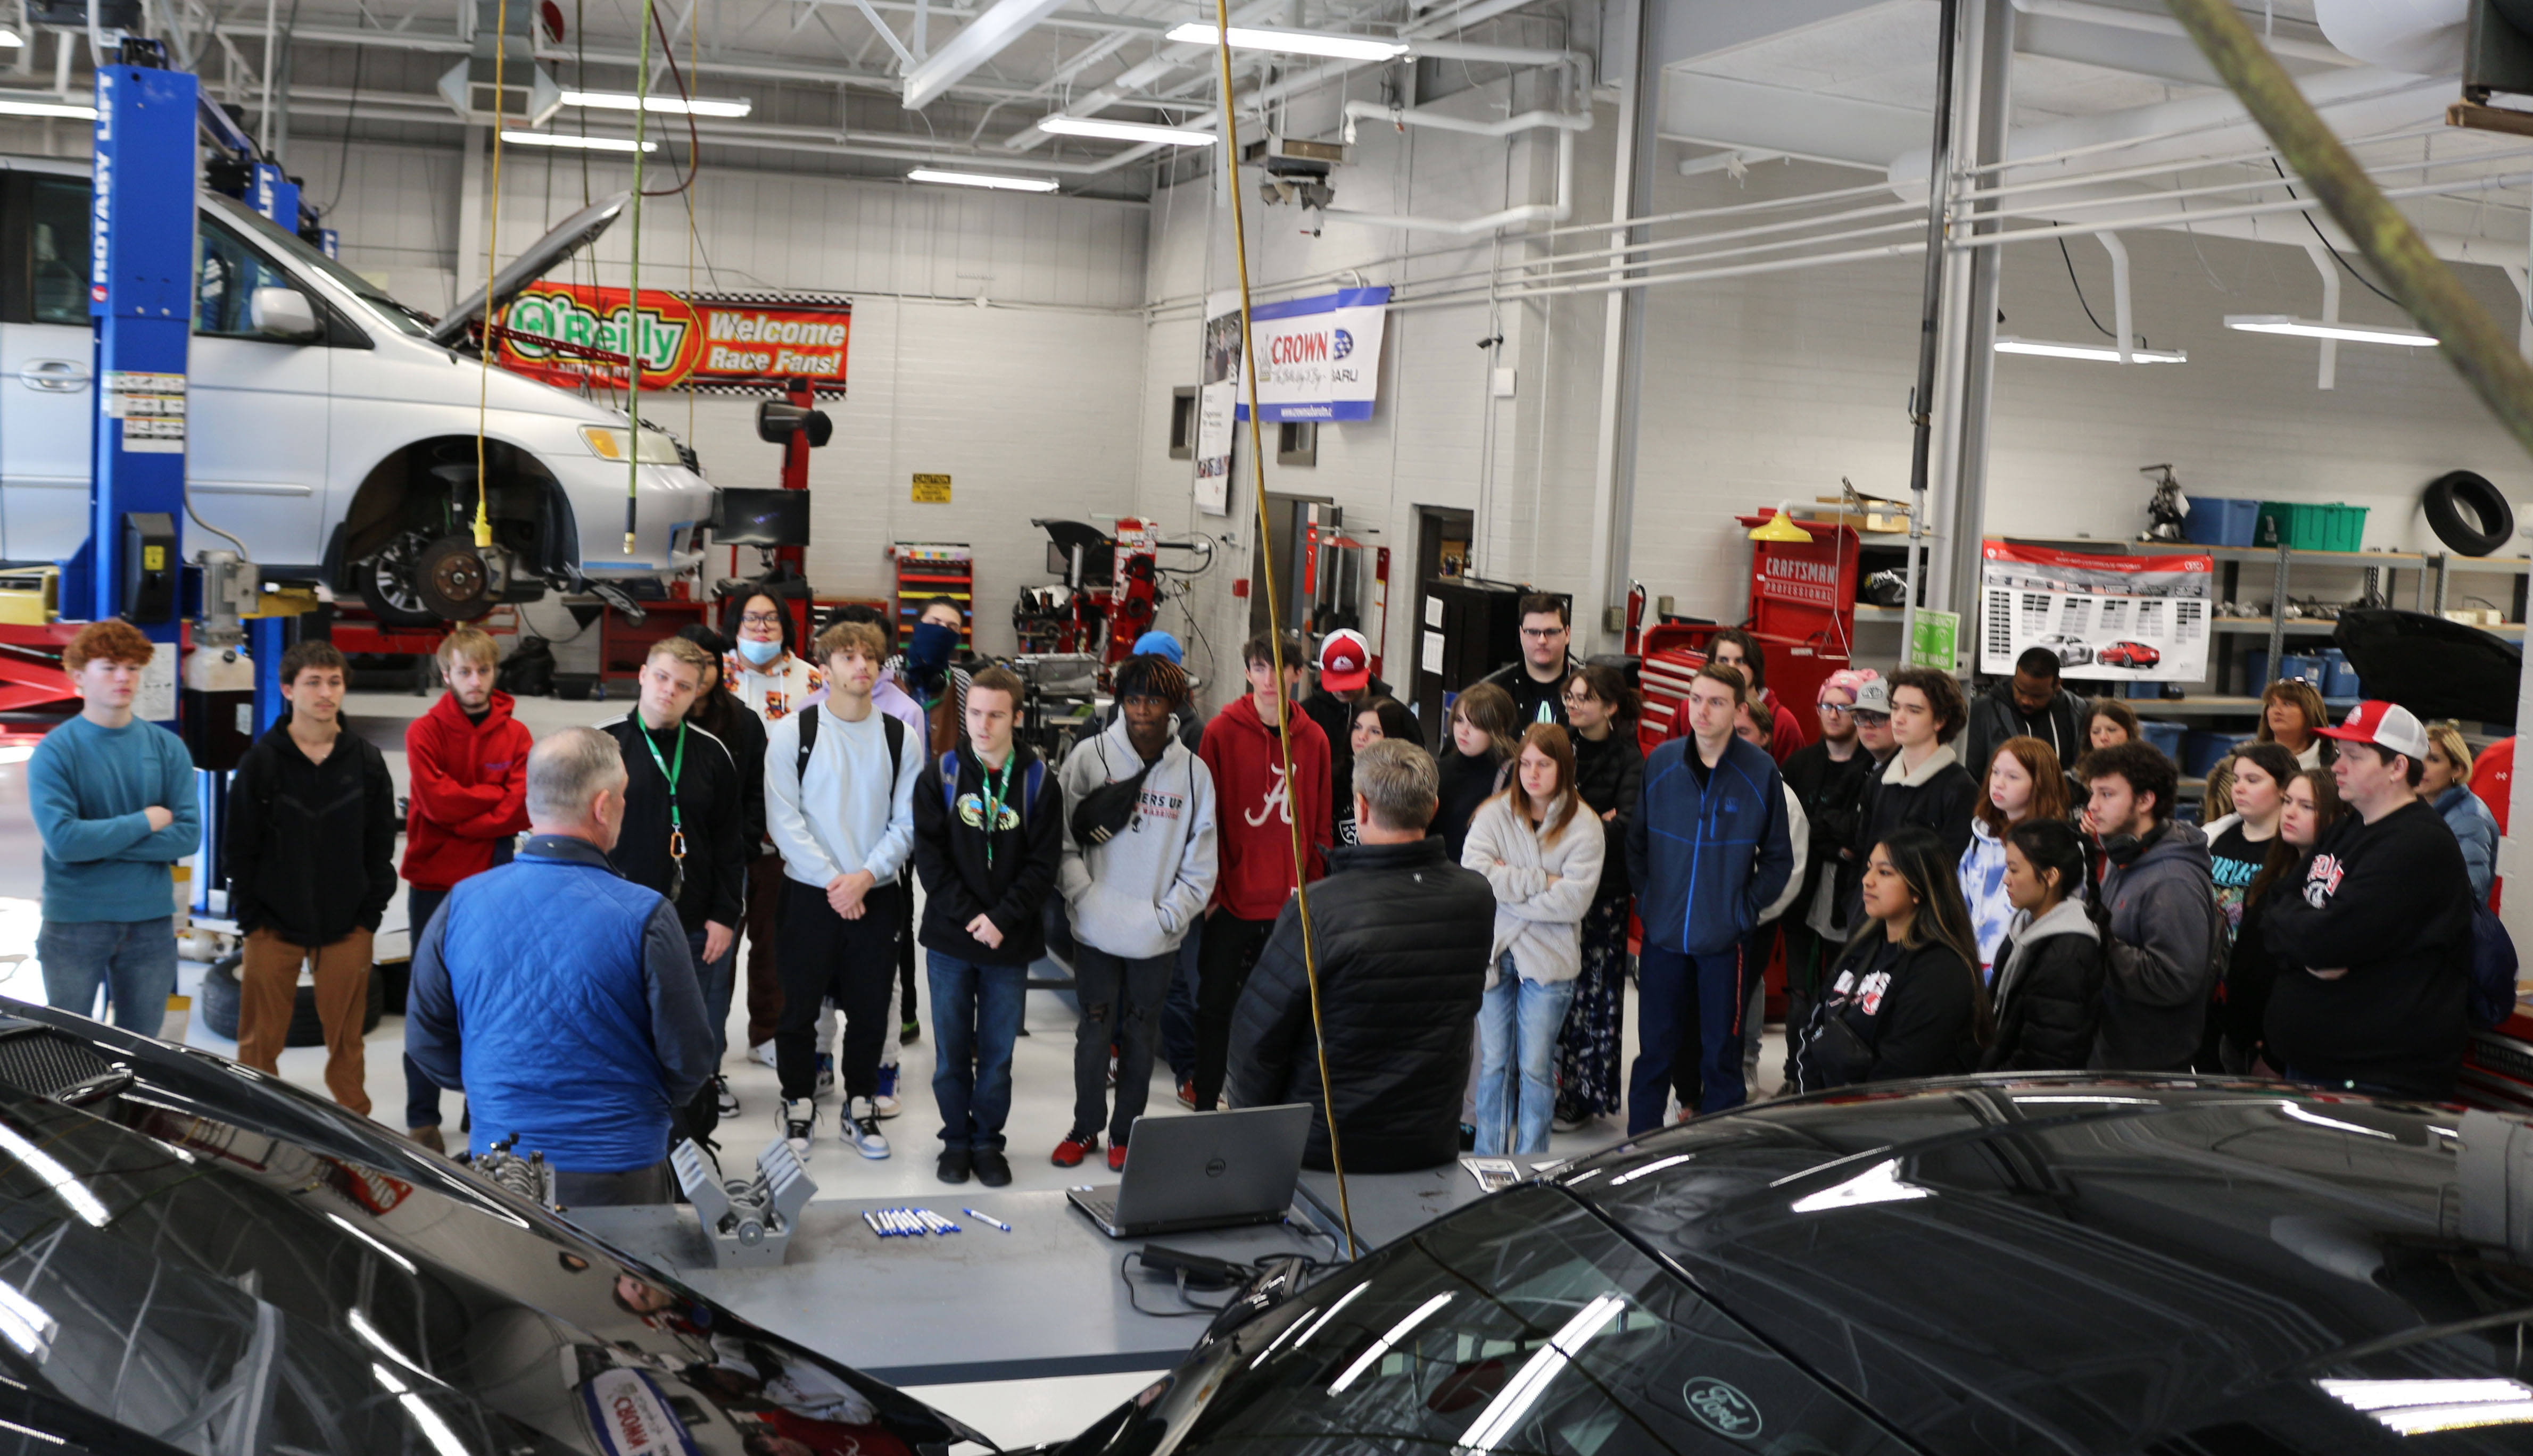 Lakeview-Fort Oglethorpe High School students learn about careers in Automotive Technology.